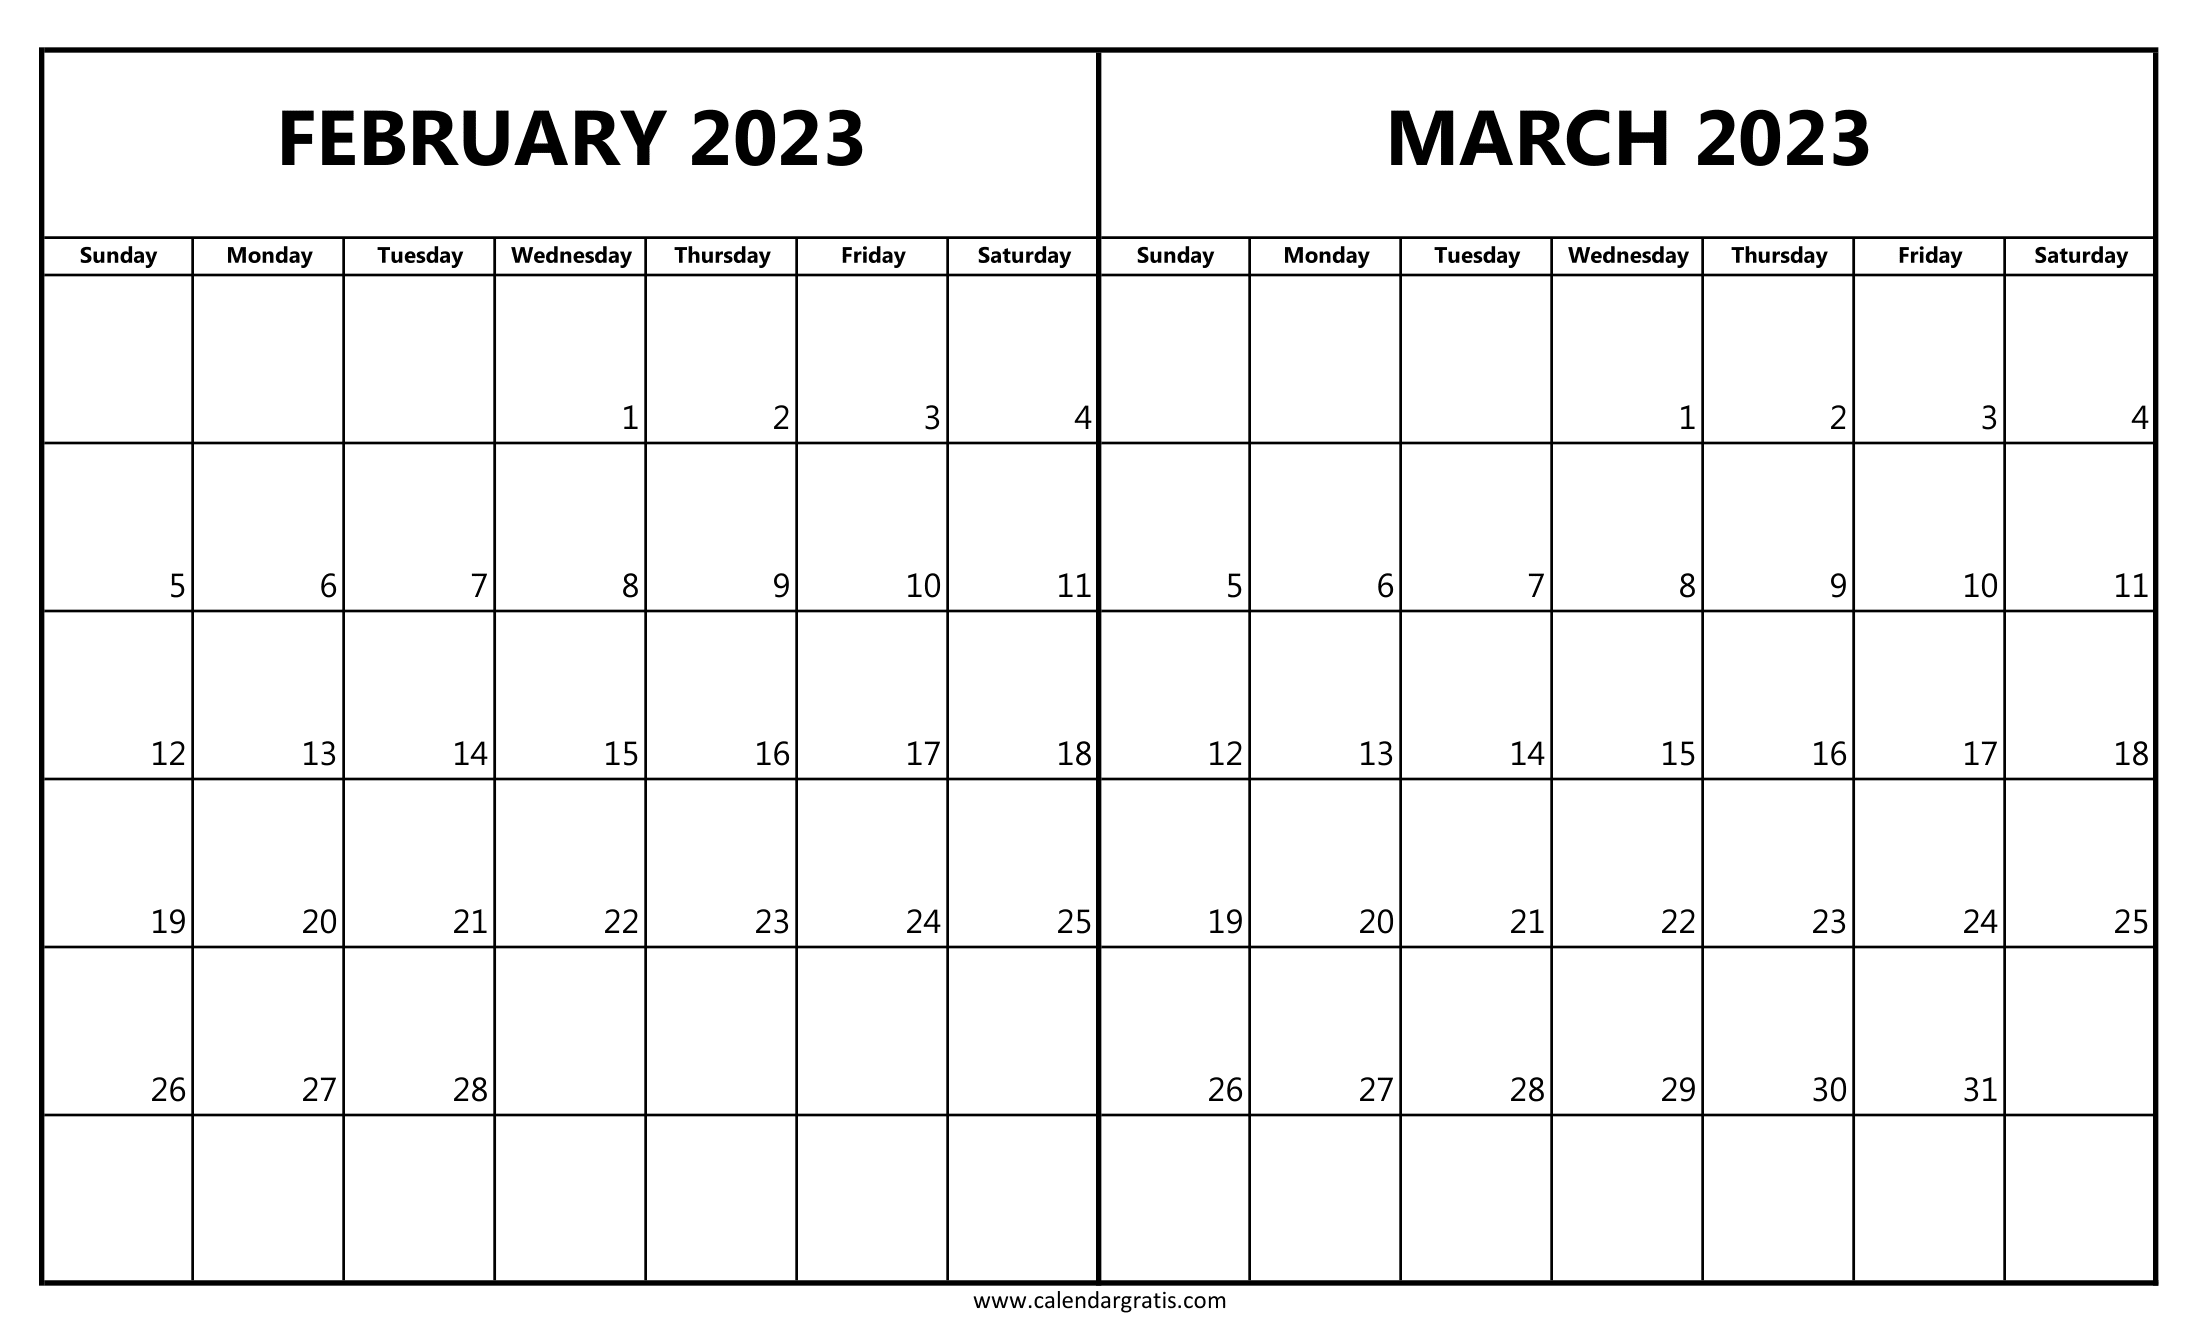 February March 2023 Calendar Printable in Horizontal Layout, Free Black and White Template, Two-month Planner.